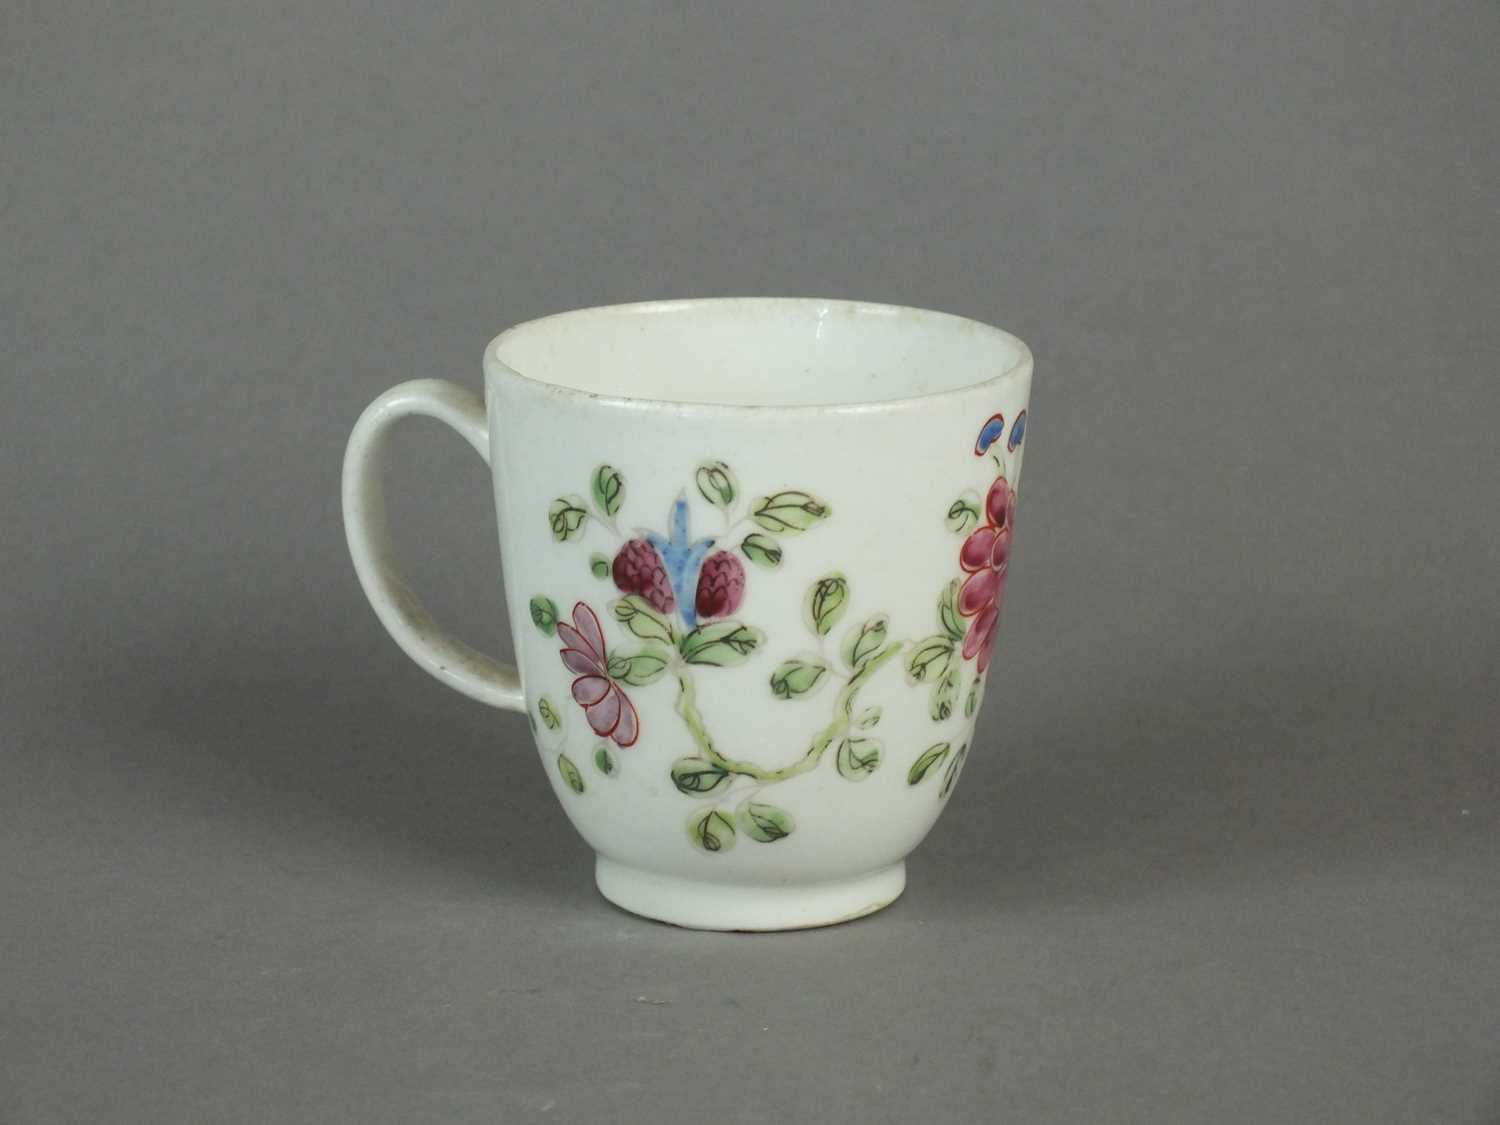 Worcester and Bow coffee cups, 18th century - Image 3 of 8